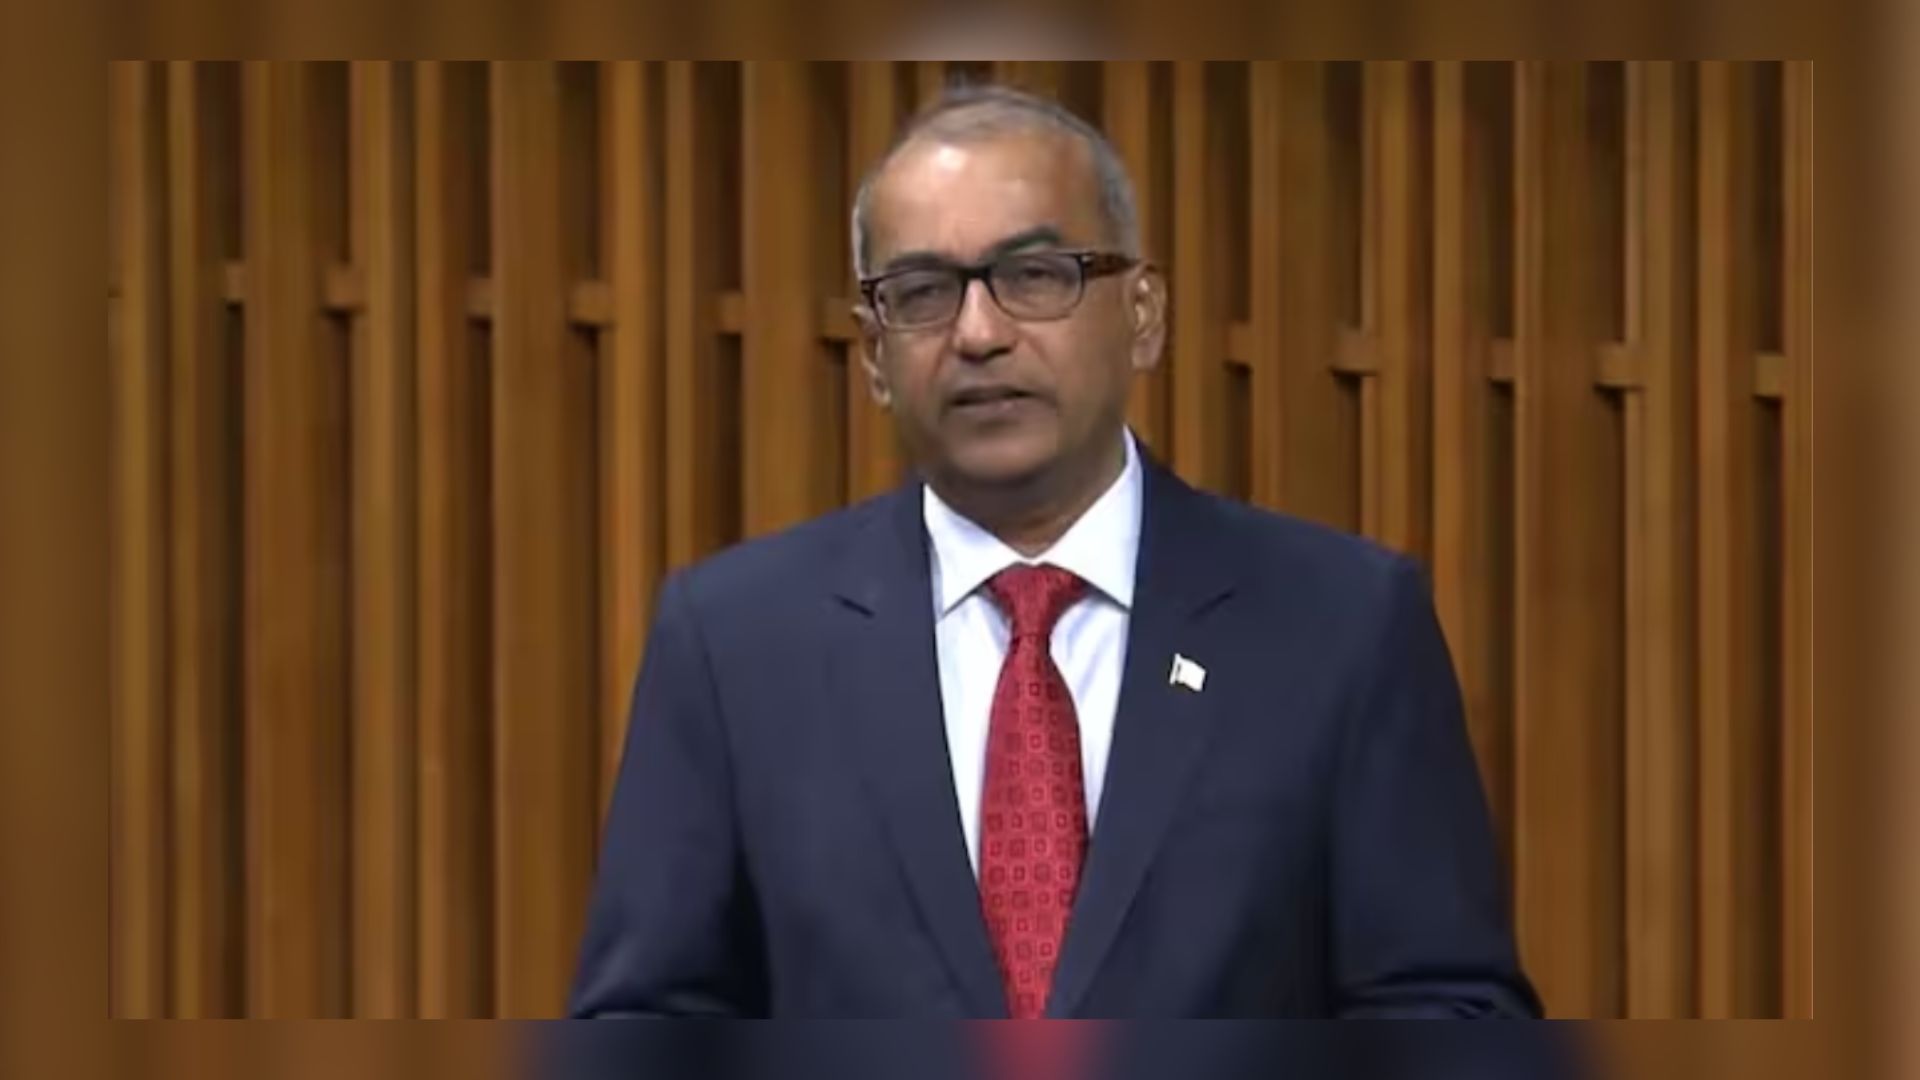 ‘Canada Is Our Land’: MP Chandra Arya Defends Hindu-Canadians In Response To Separatist Leader’s Demands